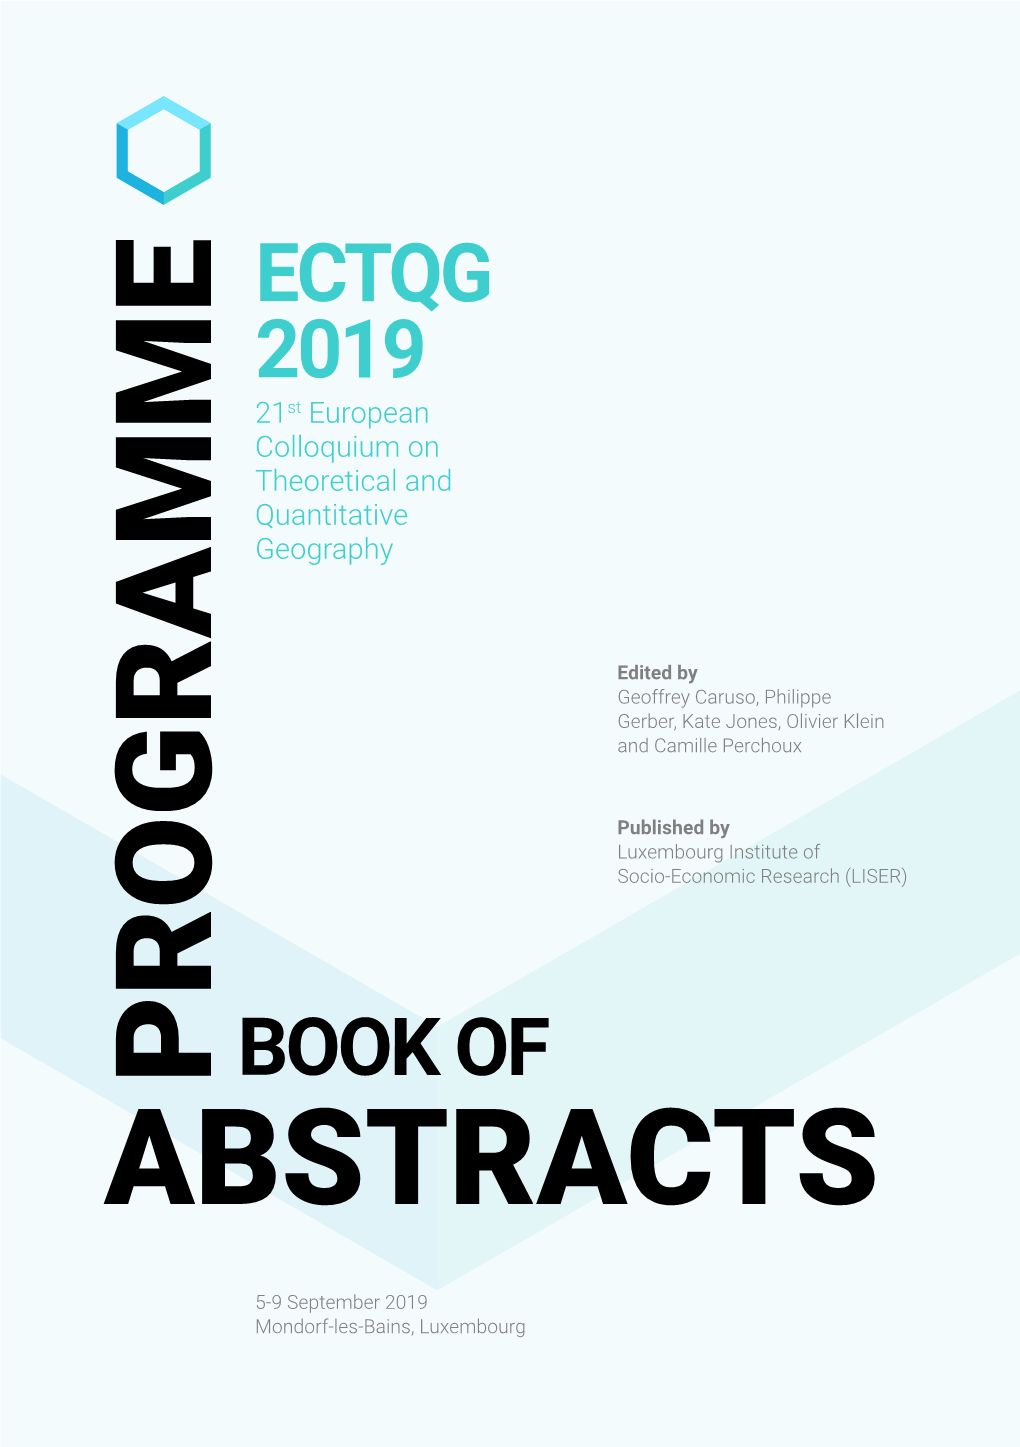 Programme Abstracts